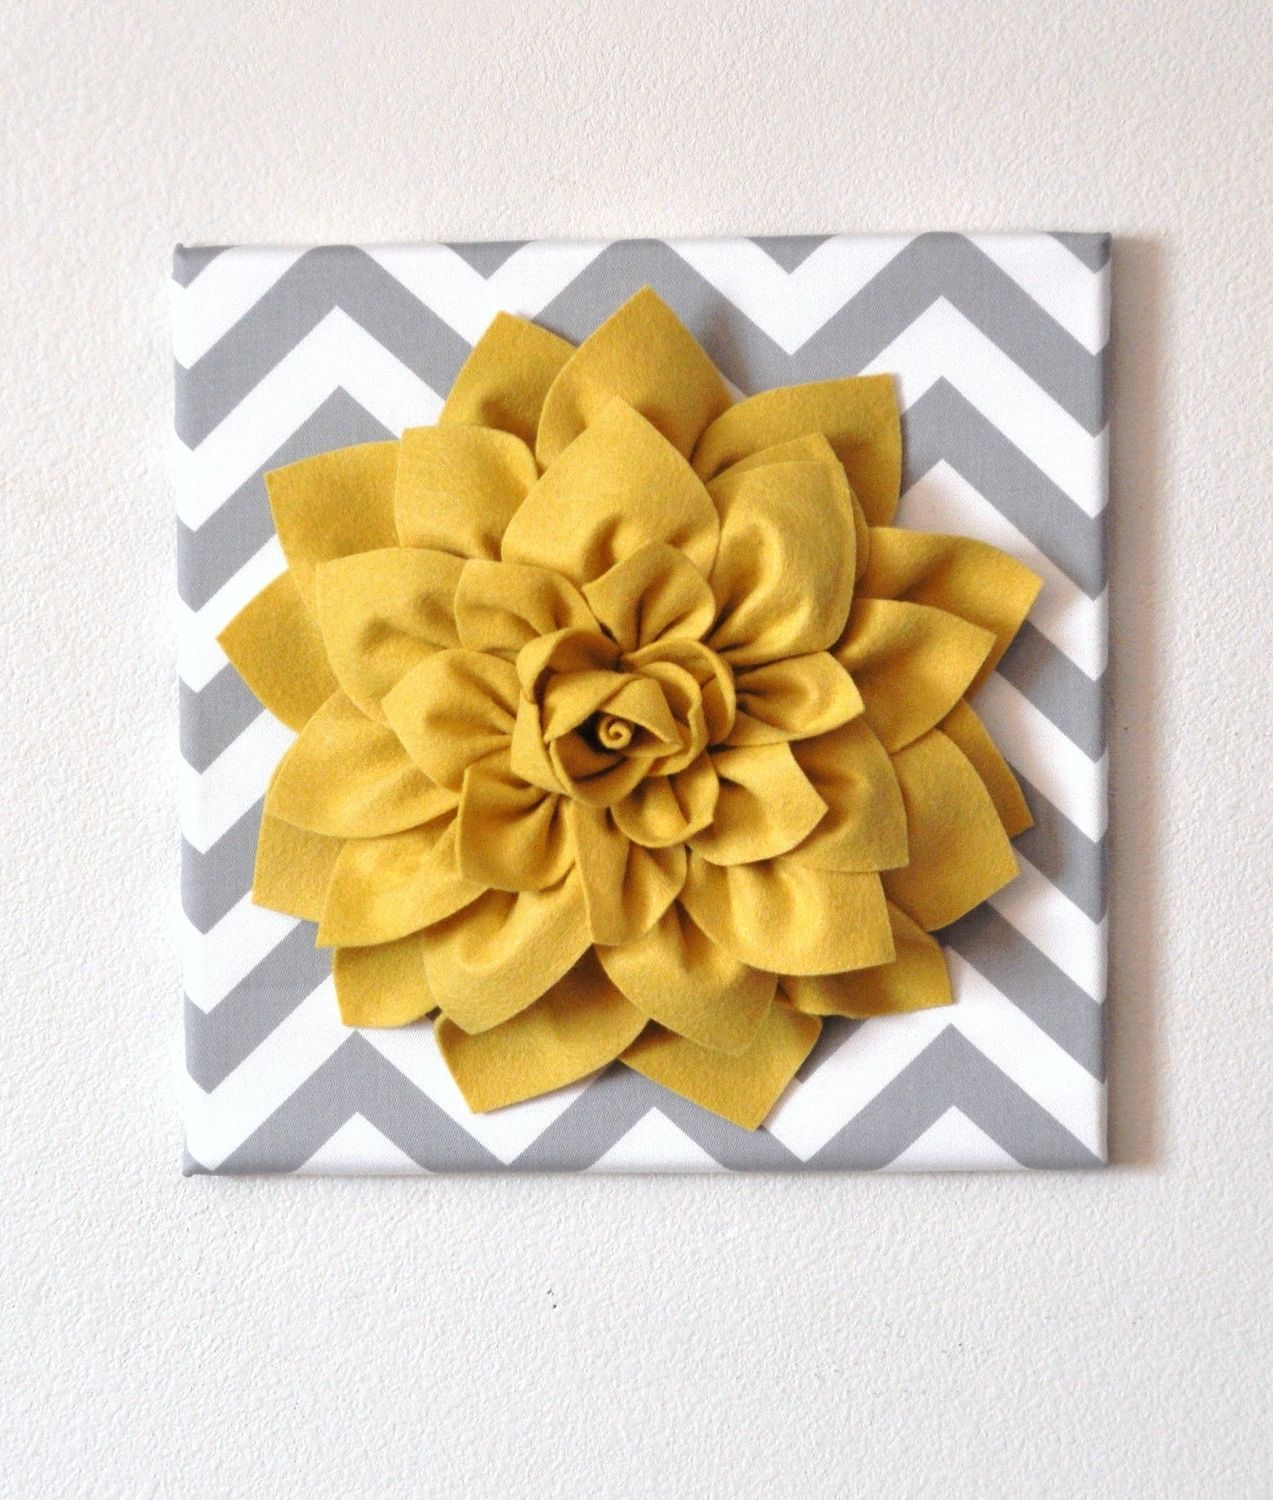 Fabric Flower Wall Art With Fashionable Wall Flower  Mellow Yellow Dahlia On Gray And White Chevron 12 X (View 3 of 15)